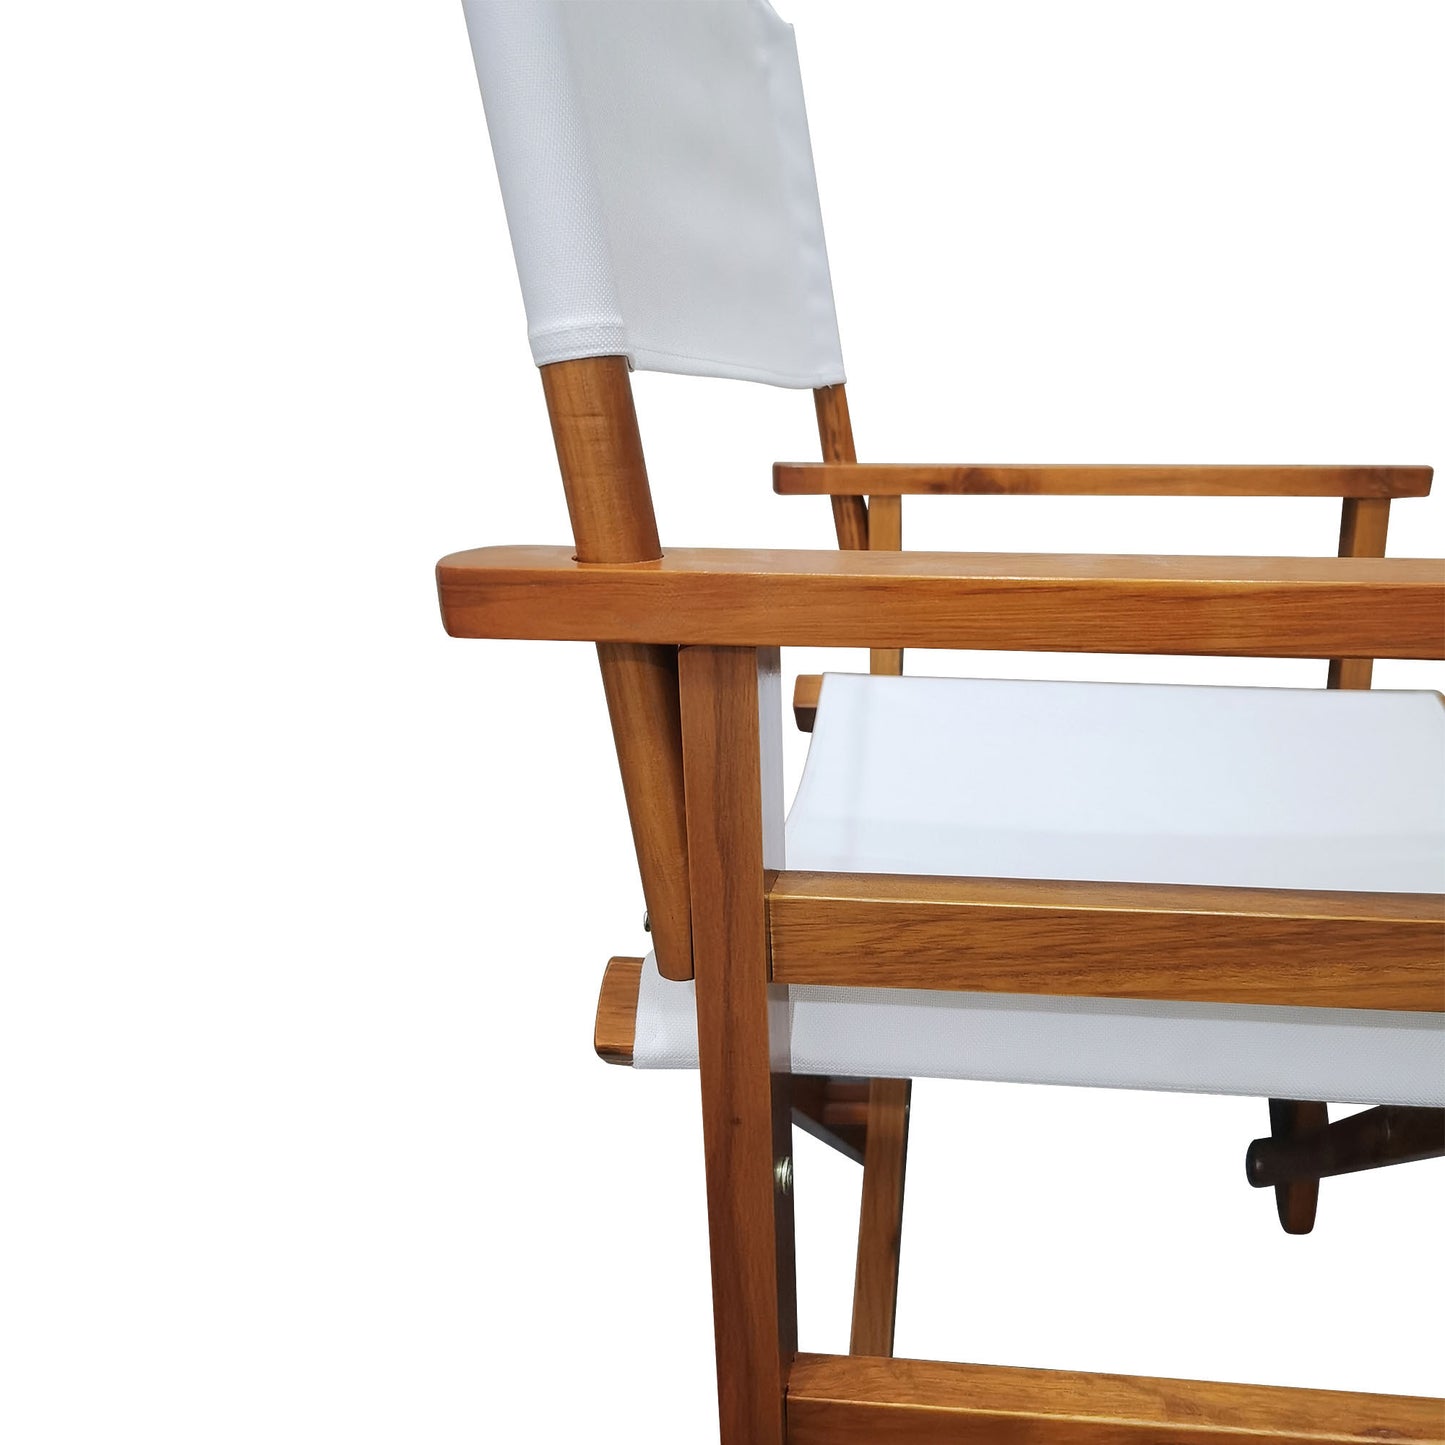 Folding Chair Wooden Director Chair Canvas Folding Chair  Folding Chair  2pcs/set   populus + Canvas (Color : White)